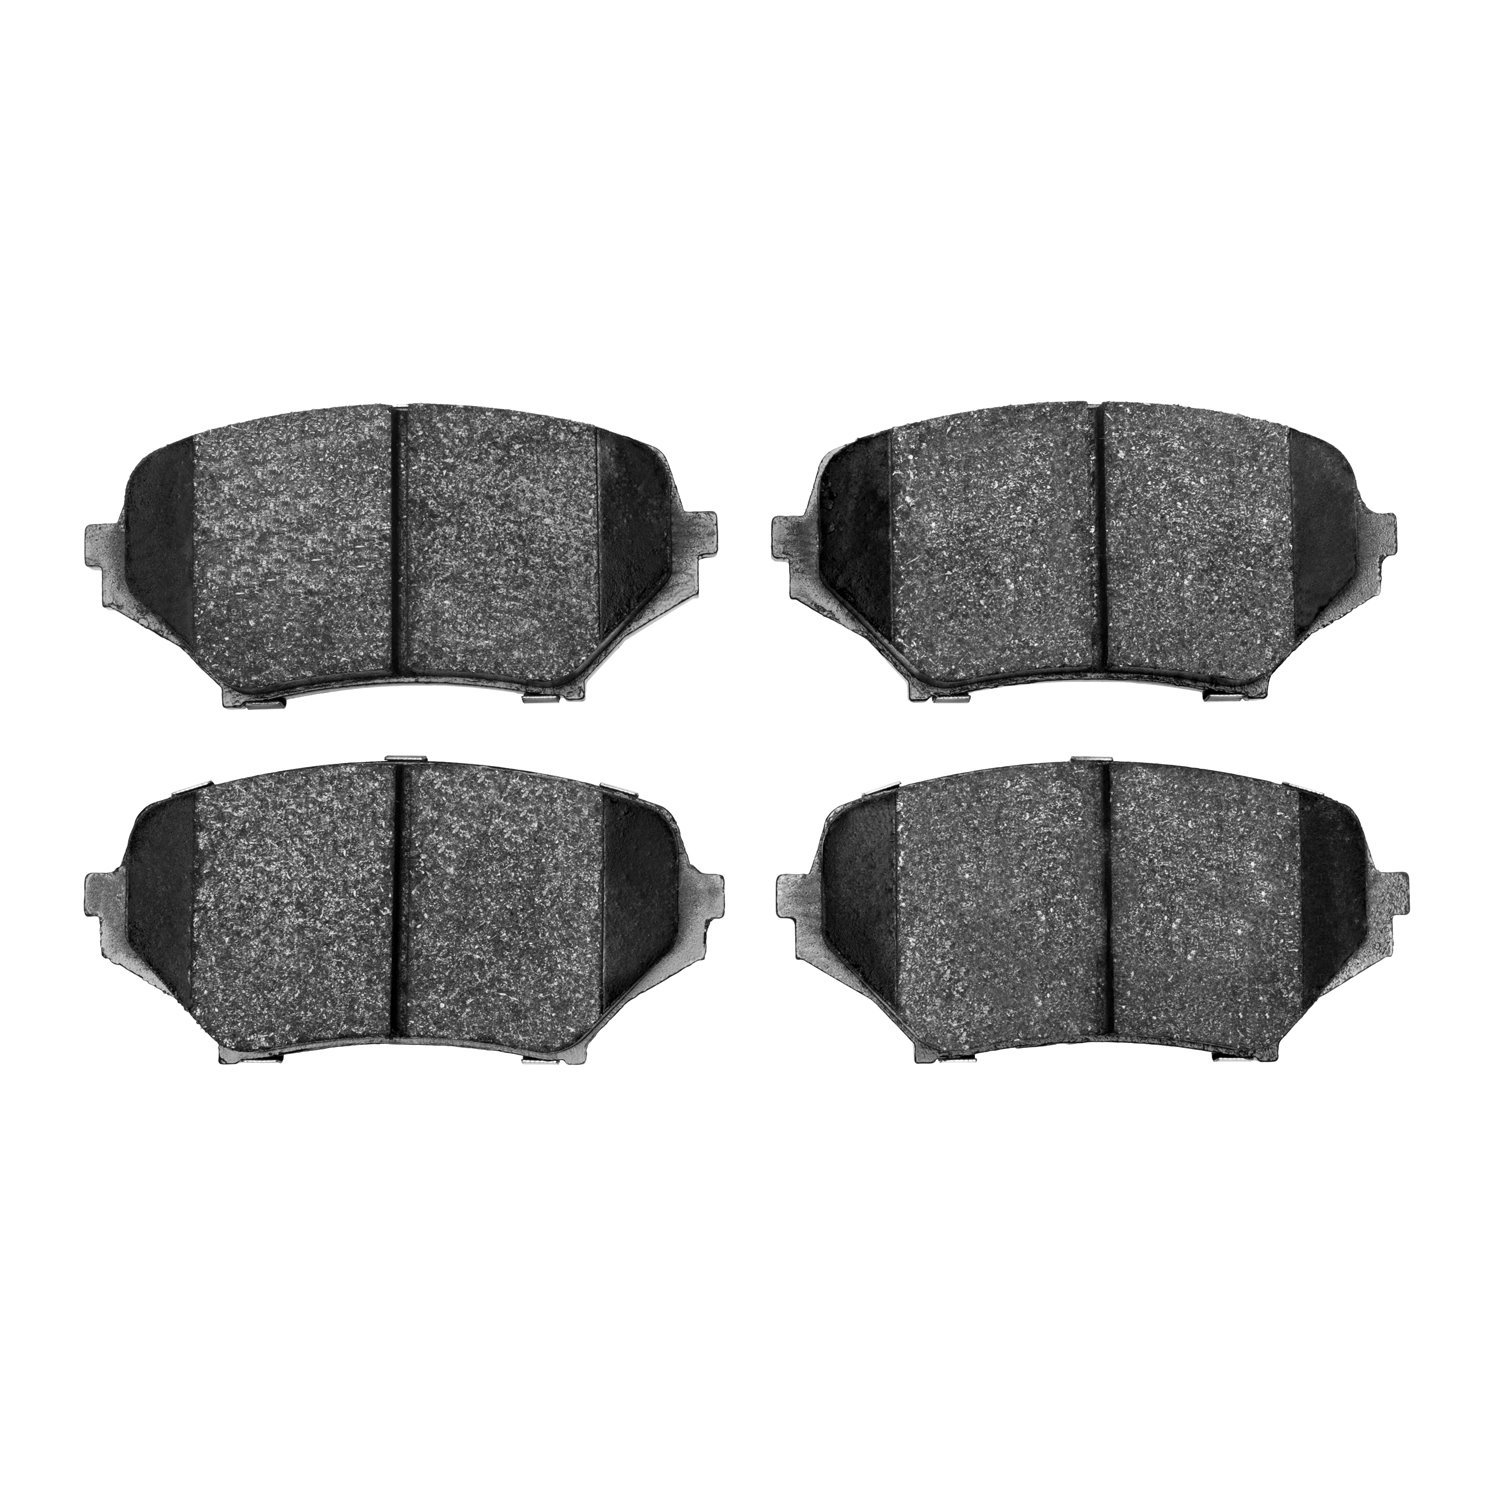 1310-1179-00 3000-Series Ceramic Brake Pads, 2006-2015 Ford/Lincoln/Mercury/Mazda, Position: Front